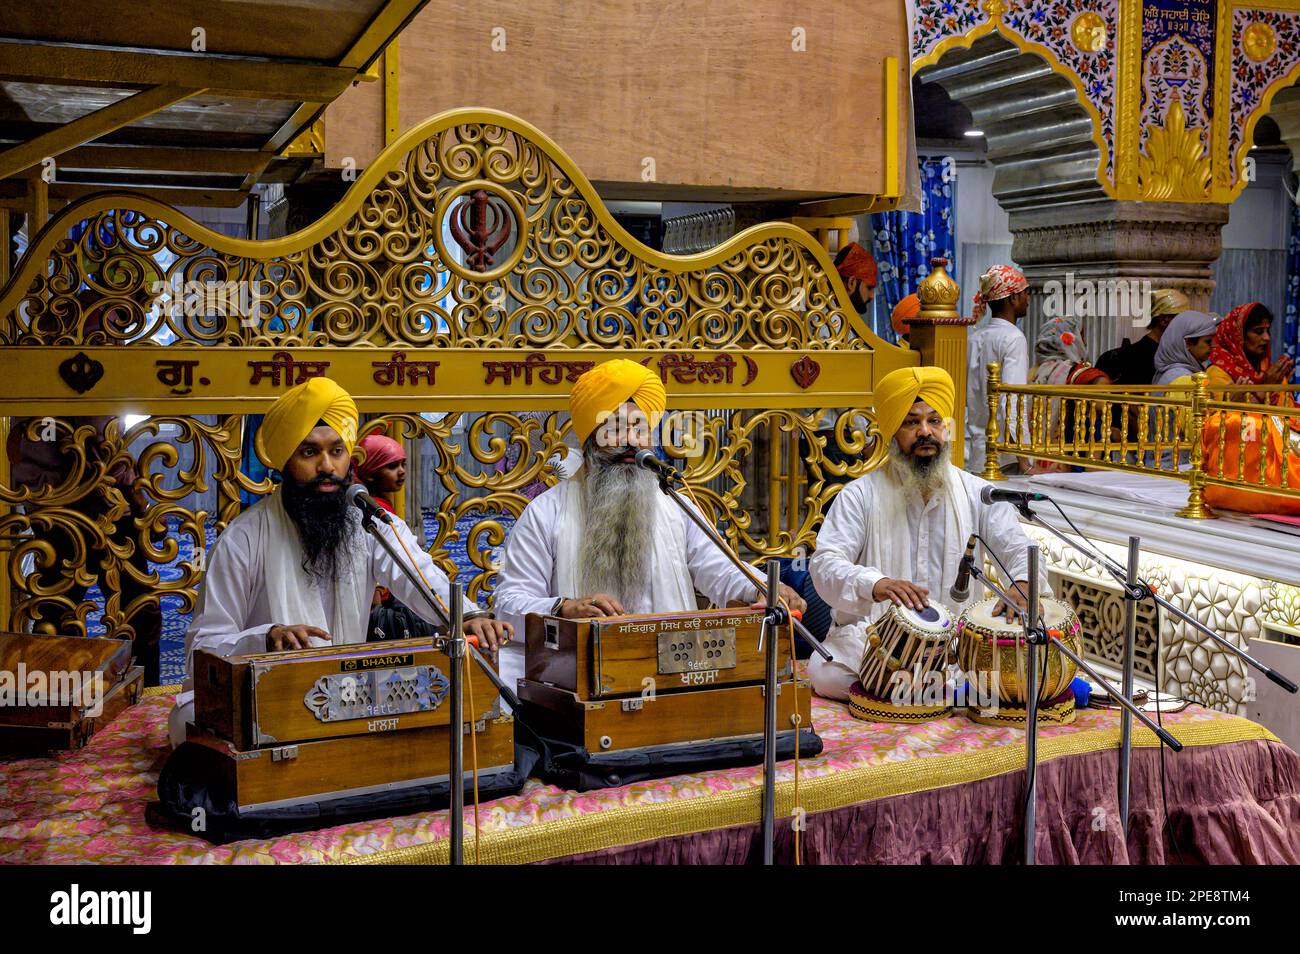 Three Sikh men with turbans and beards play music during a service at the Gurdwara Sis Ganj Sahib Sikh temple in Chandni Chowk,Old Delhi Stock Photo